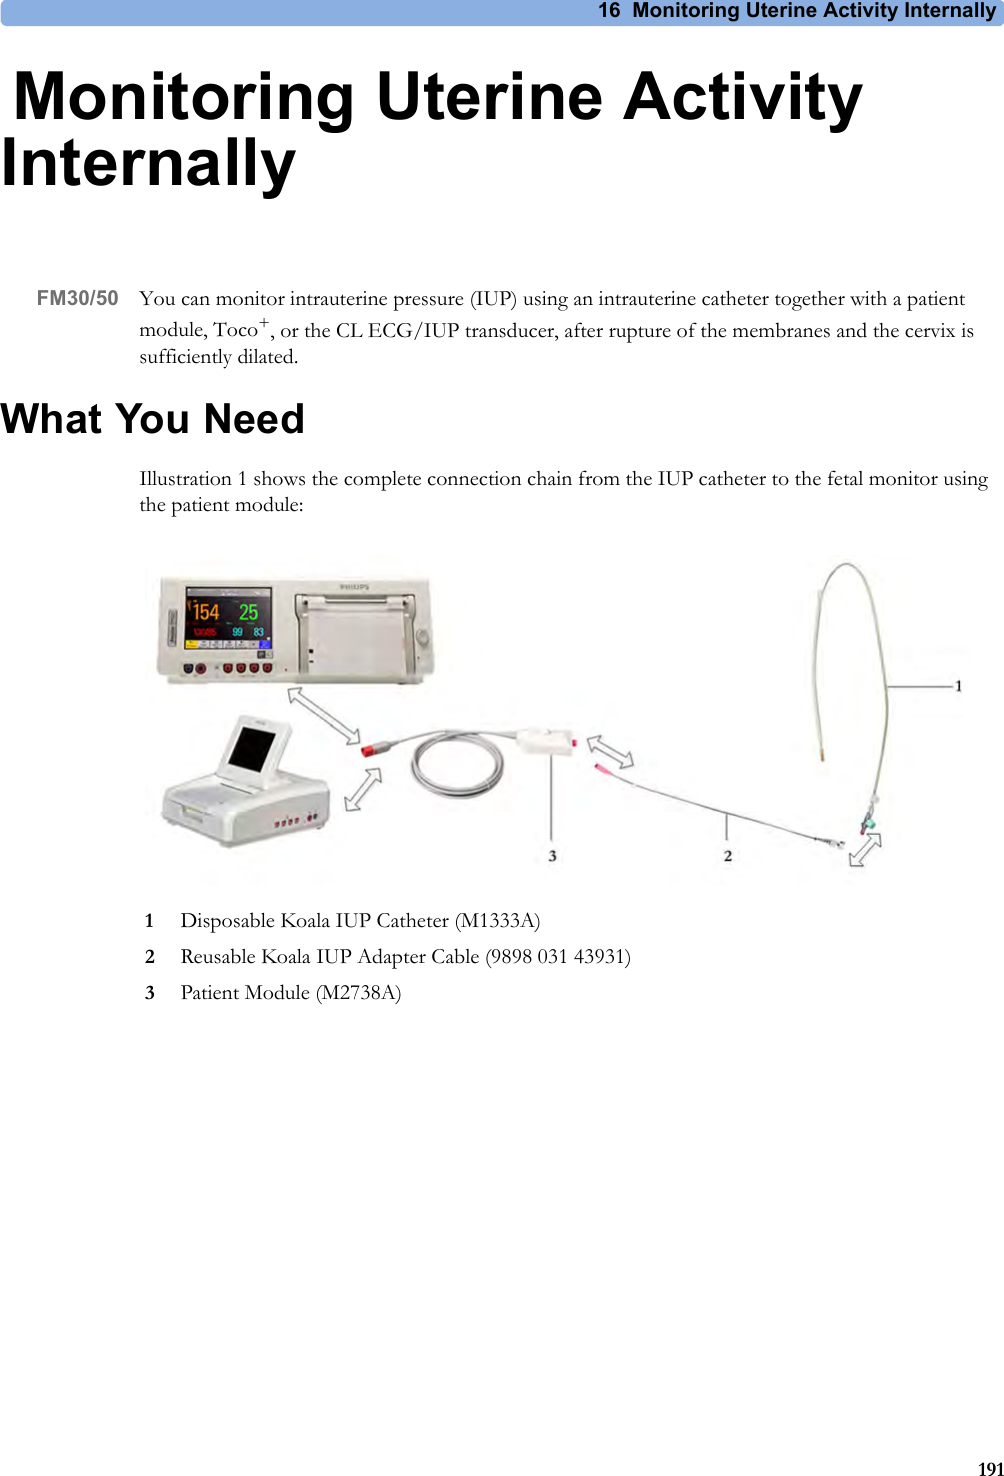 16 Monitoring Uterine Activity Internally19116Monitoring Uterine Activity InternallyFM30/50 You can monitor intrauterine pressure (IUP) using an intrauterine catheter together with a patient module, Toco+, or the CL ECG/IUP transducer, after rupture of the membranes and the cervix is sufficiently dilated.What You NeedIllustration 1 shows the complete connection chain from the IUP catheter to the fetal monitor using the patient module:1Disposable Koala IUP Catheter (M1333A)2Reusable Koala IUP Adapter Cable (9898 031 43931)3Patient Module (M2738A)